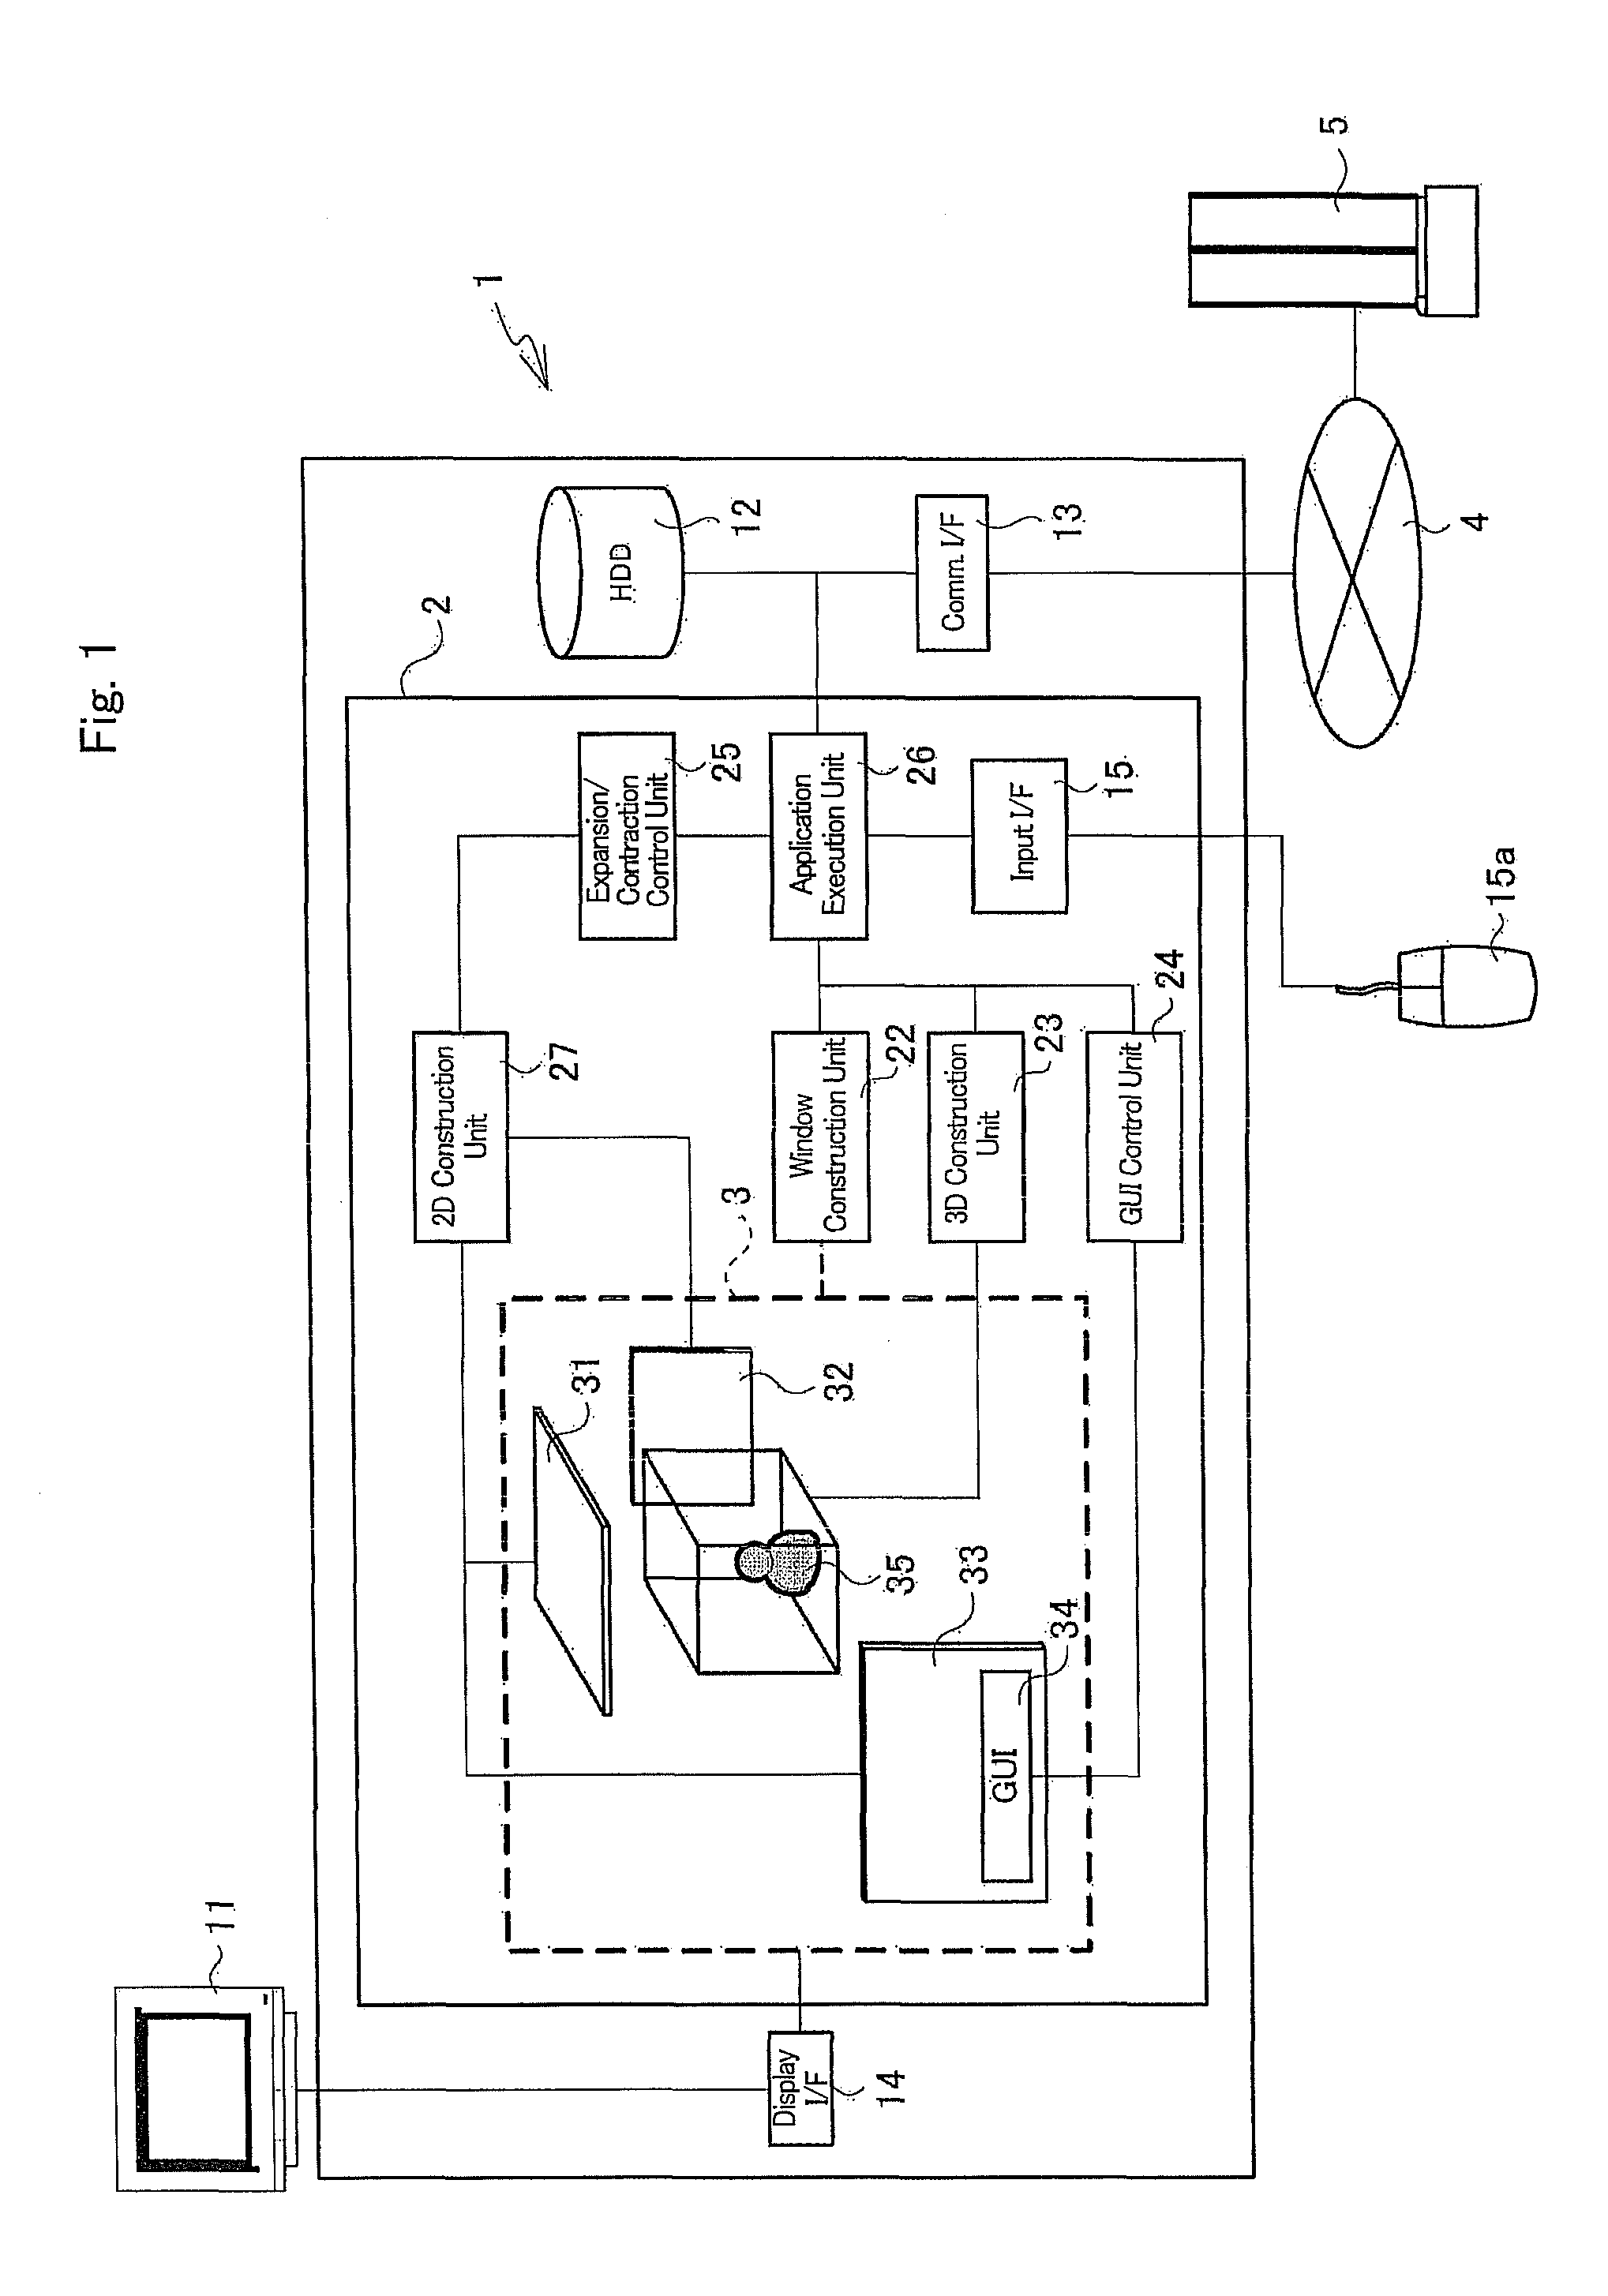 Screen operation system, screen operation method, and method for providing network service